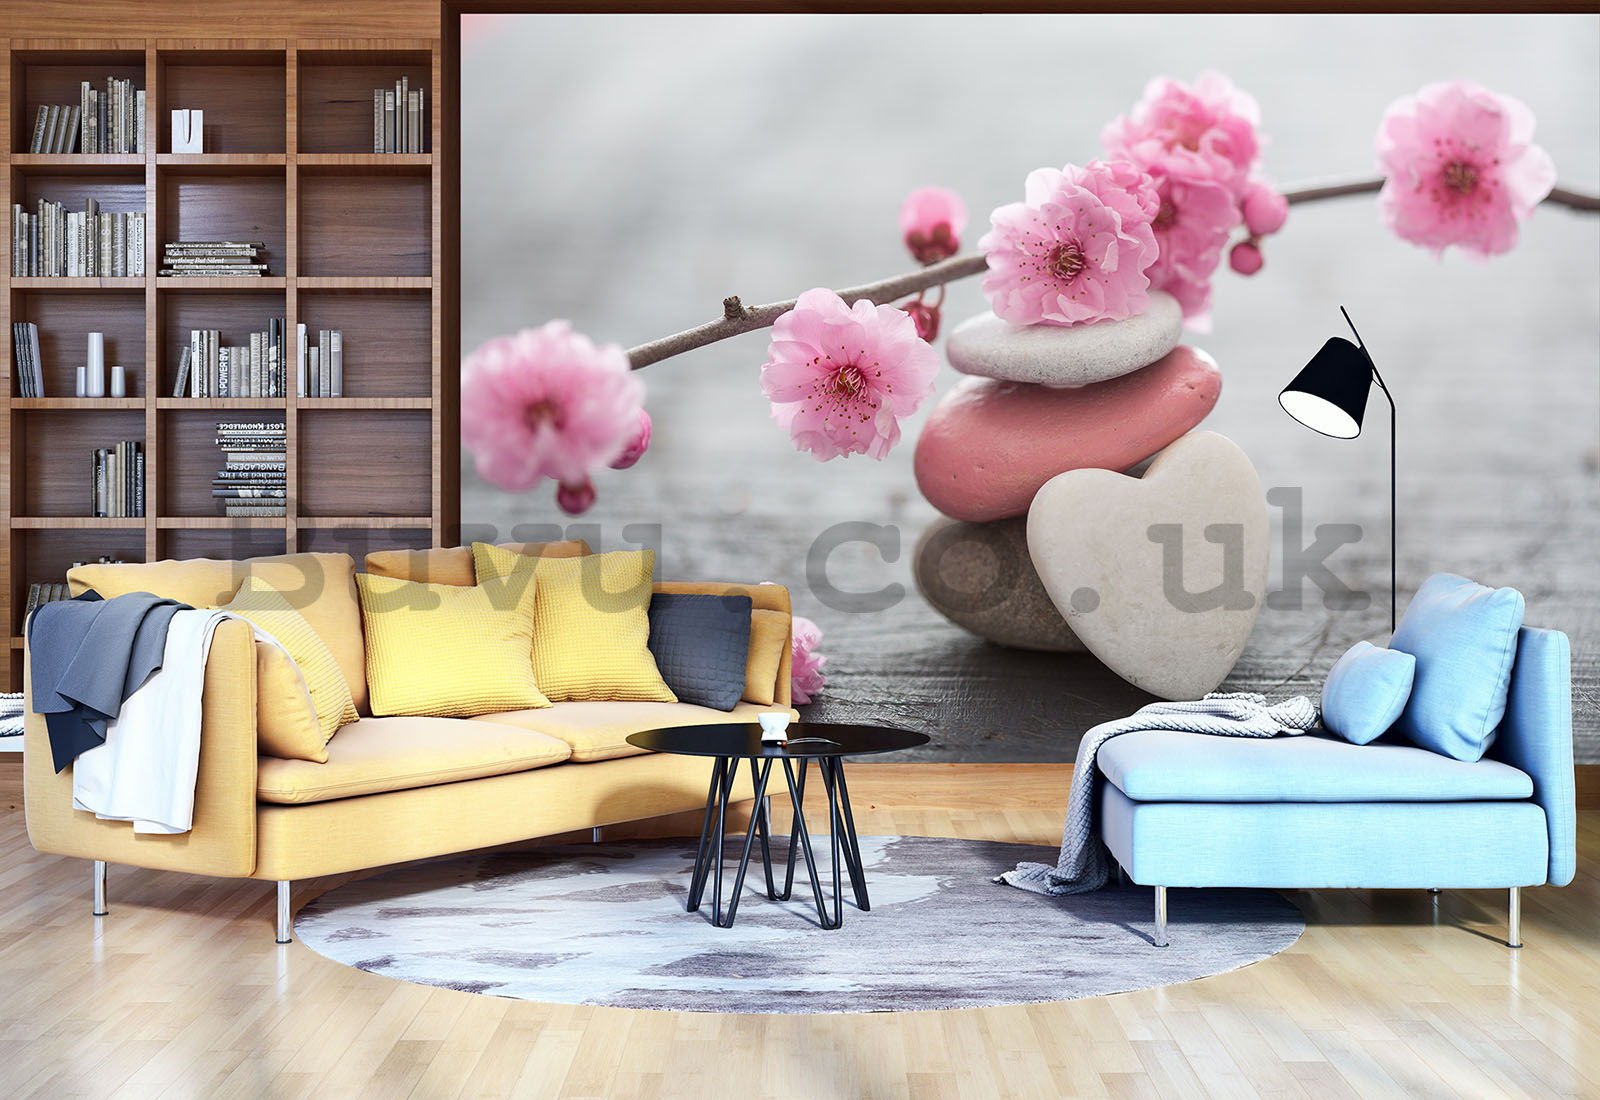 Wall Mural: Flowering cherry and heart - 254x368 cm